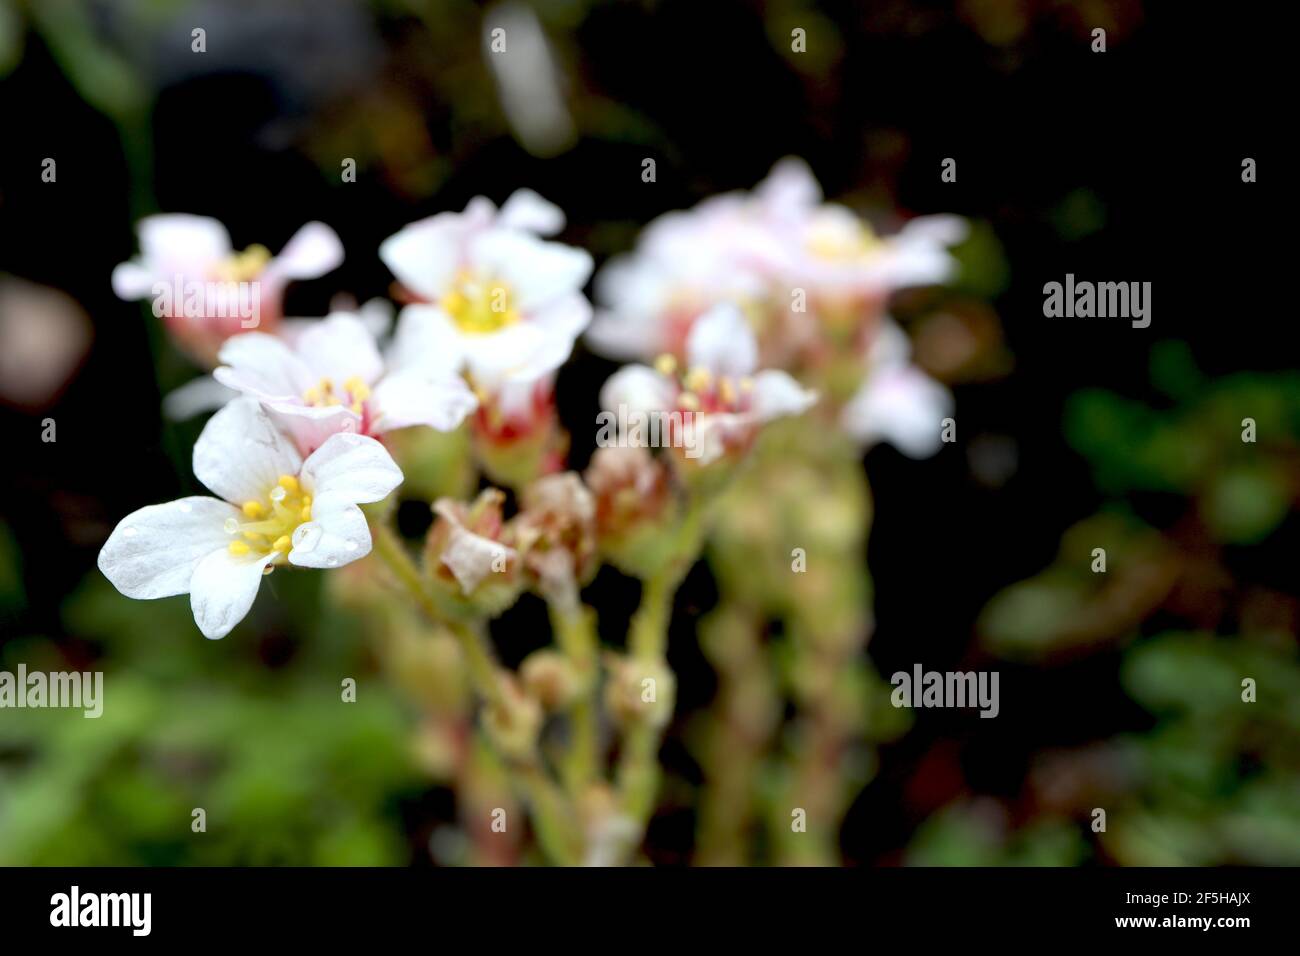 Saxifraga cespitosa Tufted alpine saxifrage – white flowers atop leafy stems and rigid base leaves,  March, England, UK Stock Photo